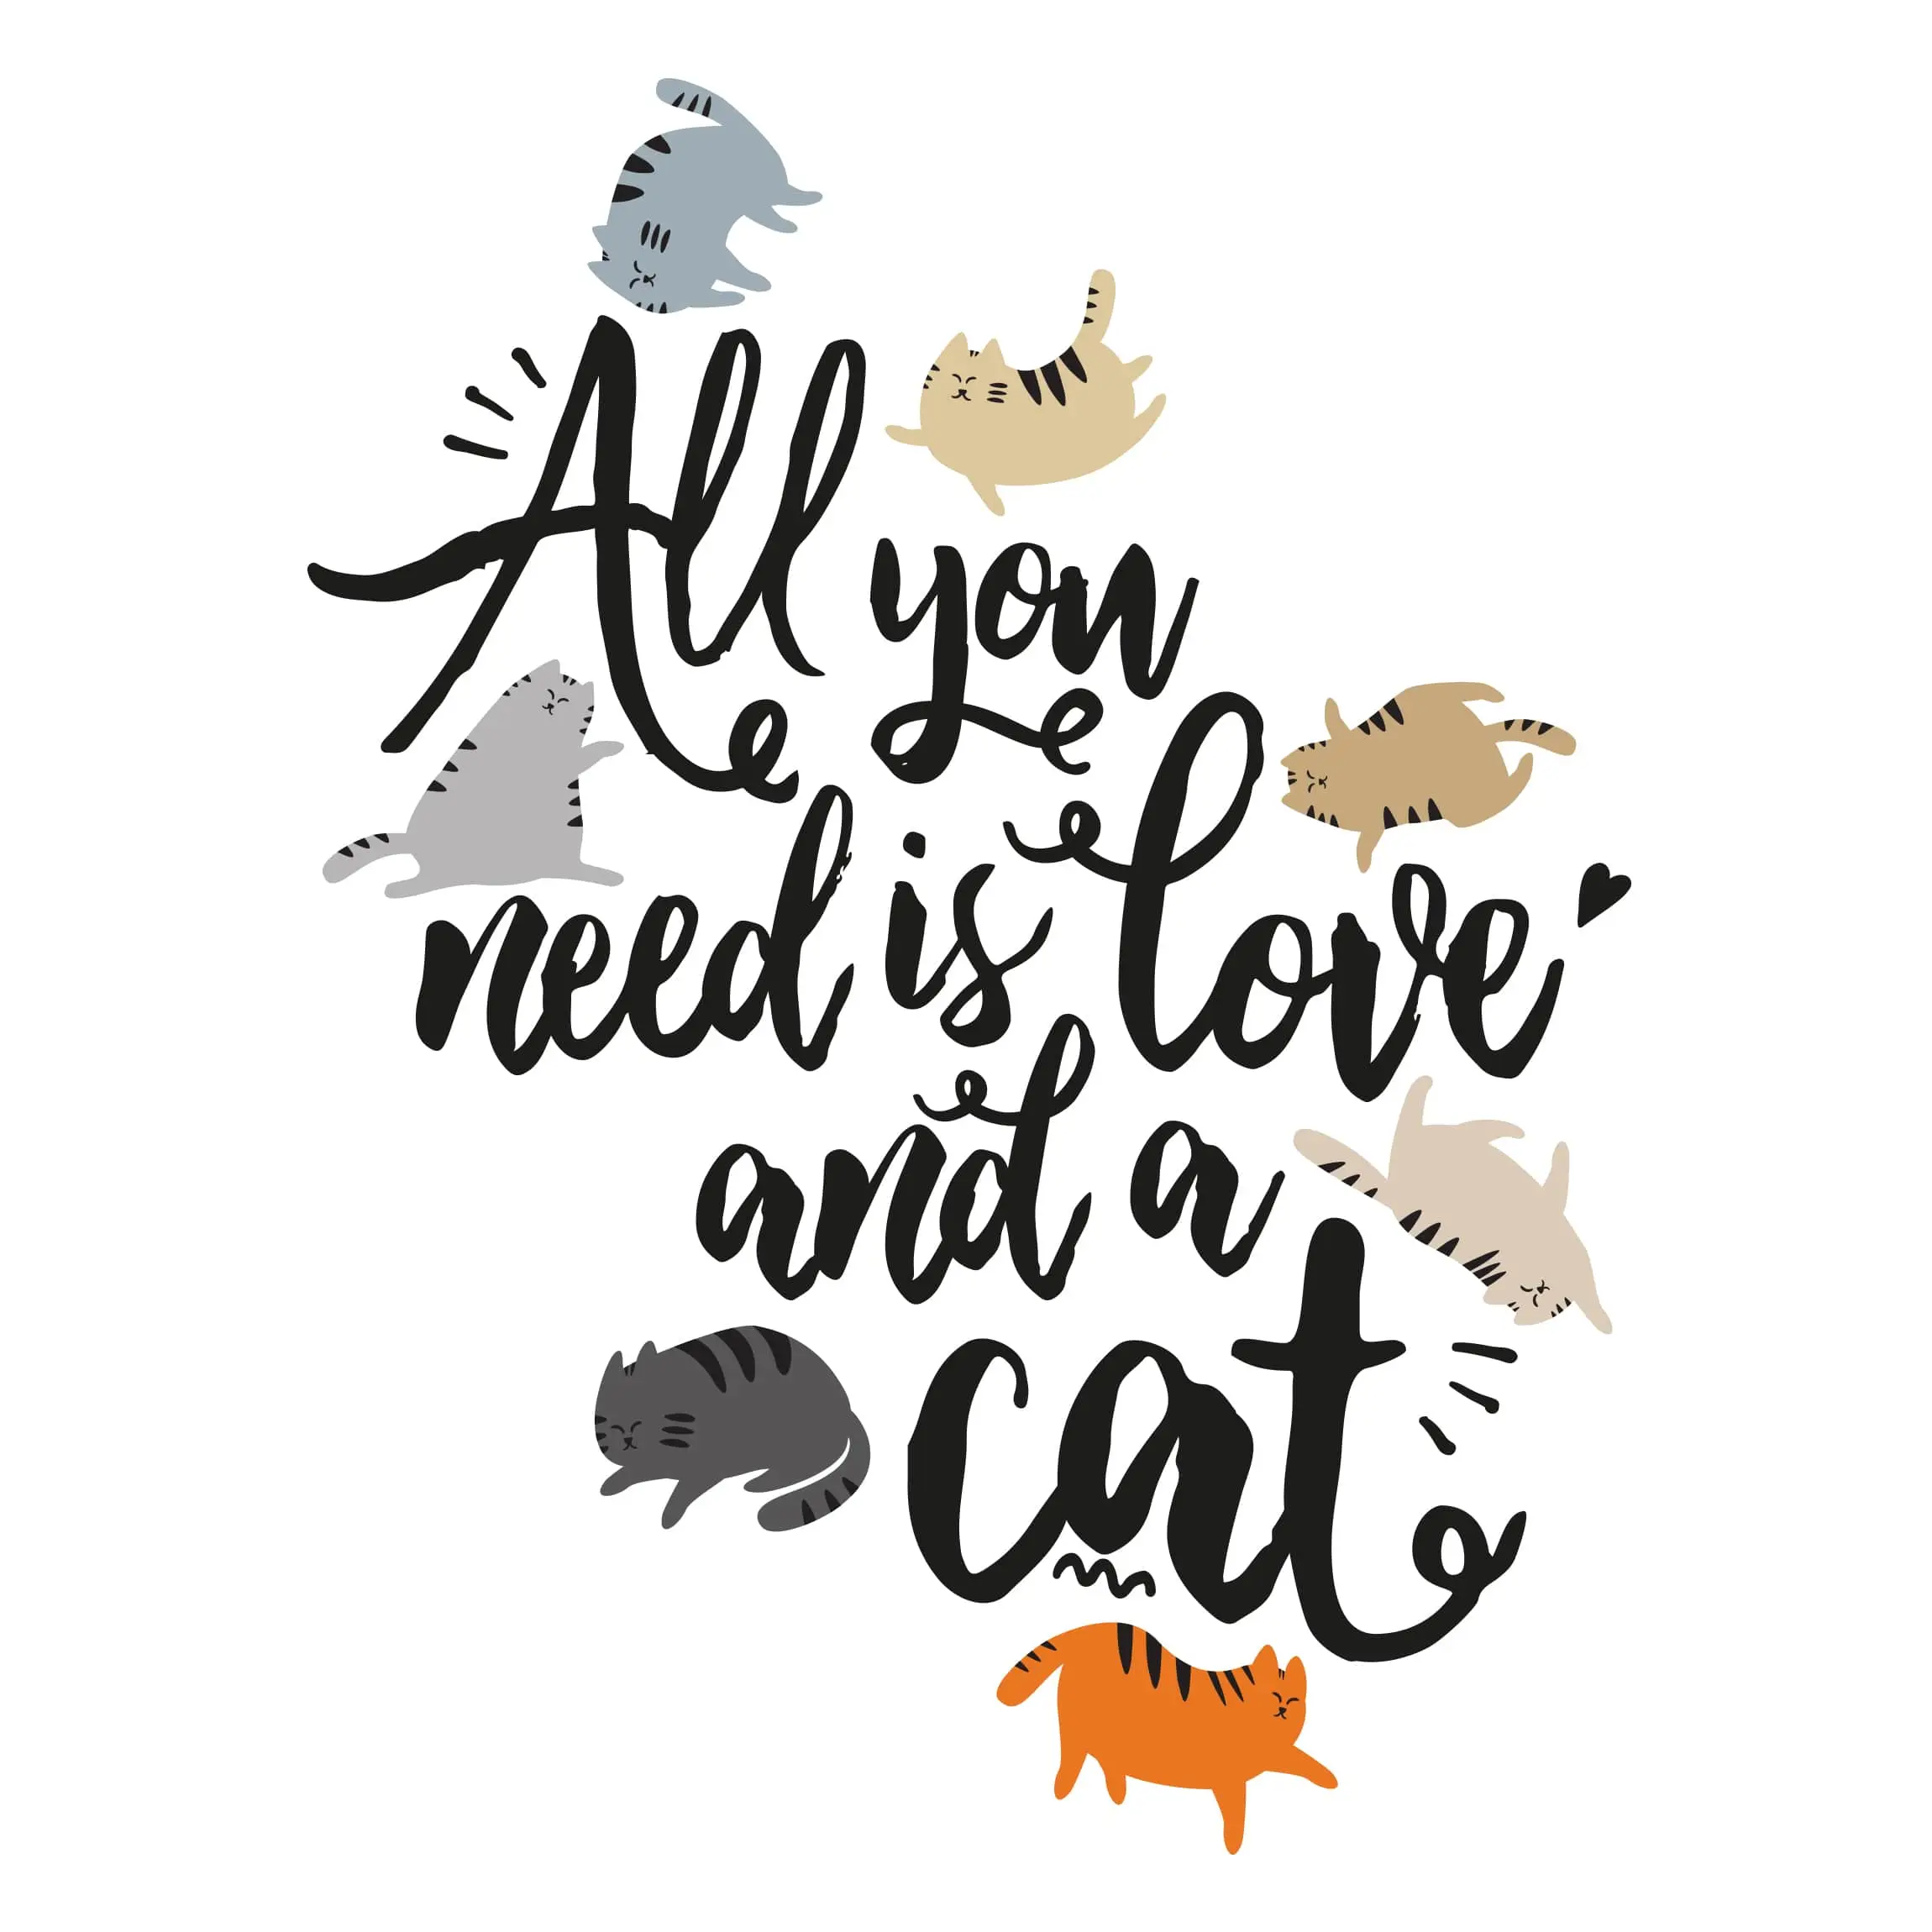 love you All and cat need is a